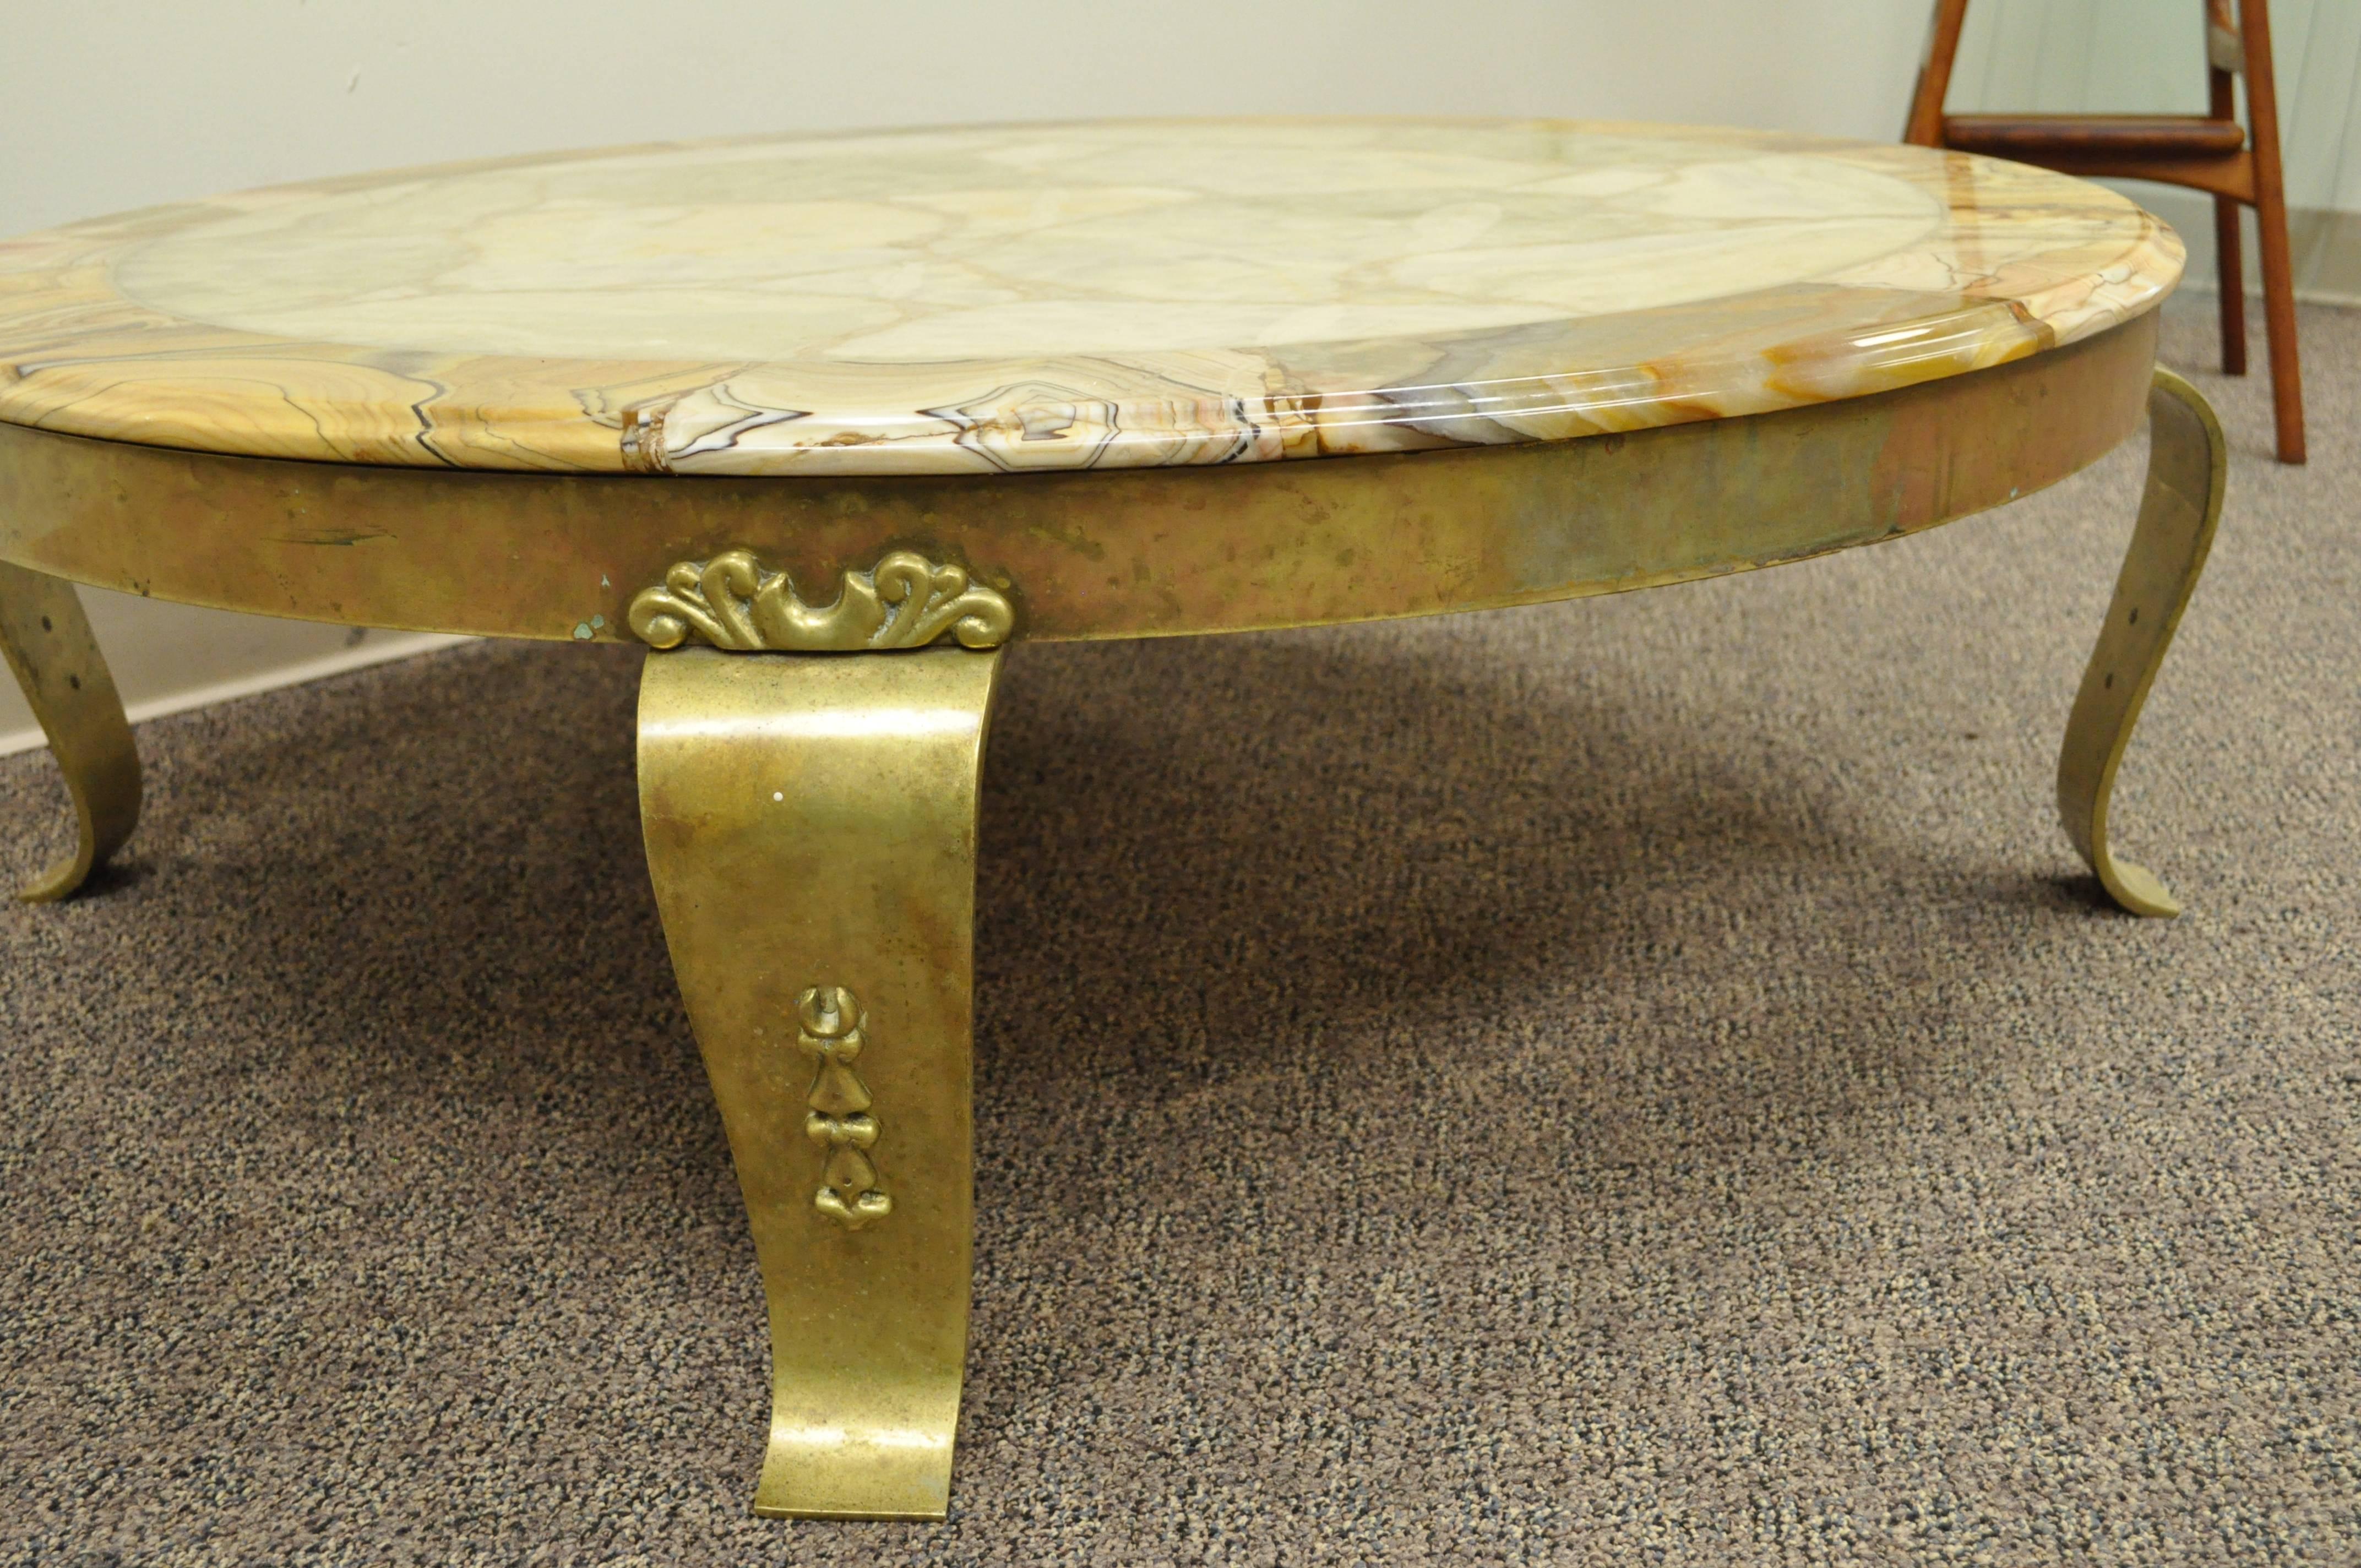 Lacquered Brass and Onyx Round Coffee Table by Muller's of Mexico Attr. to Arturo Pani